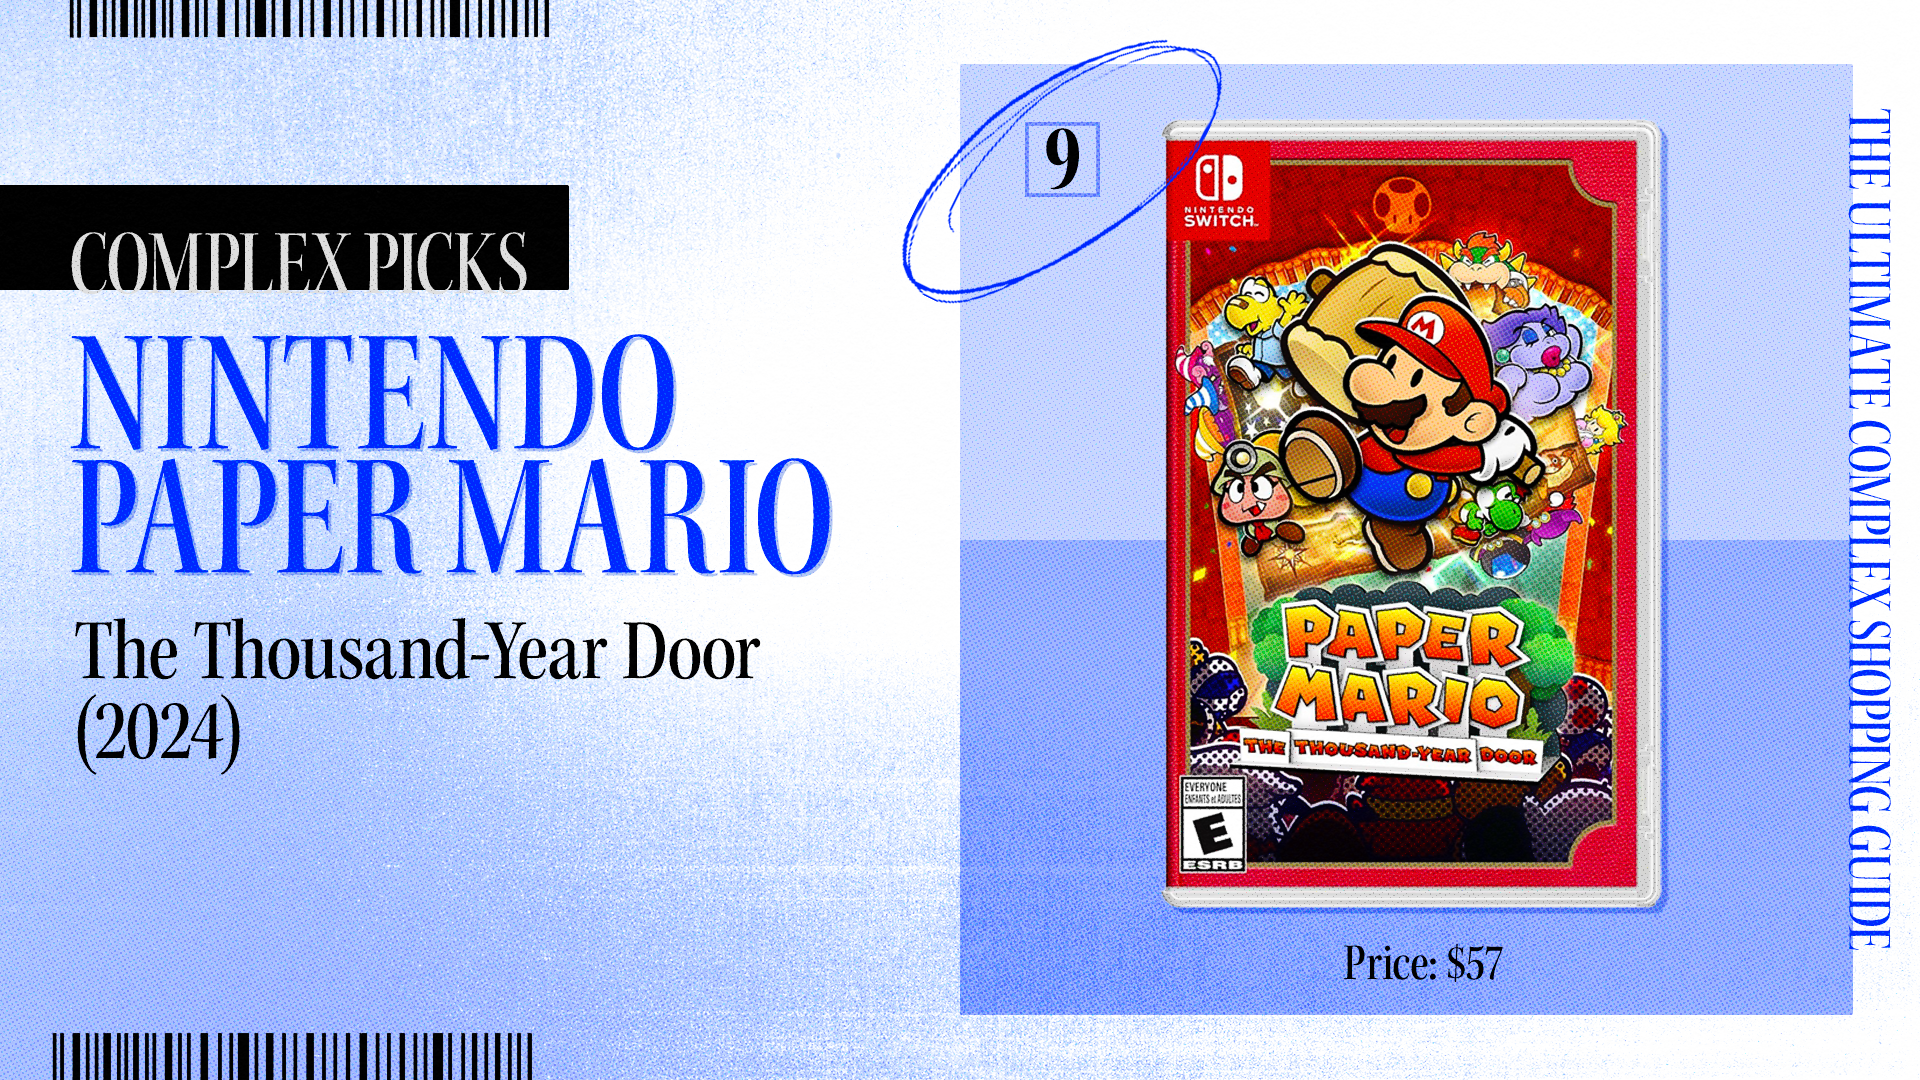 Nintendo Paper Mario: The Thousand-Year Door (2024) for Nintendo Switch is featured as Complex&#x27;s Pick in their Ultimate Complex Shopping Guide, priced at $57